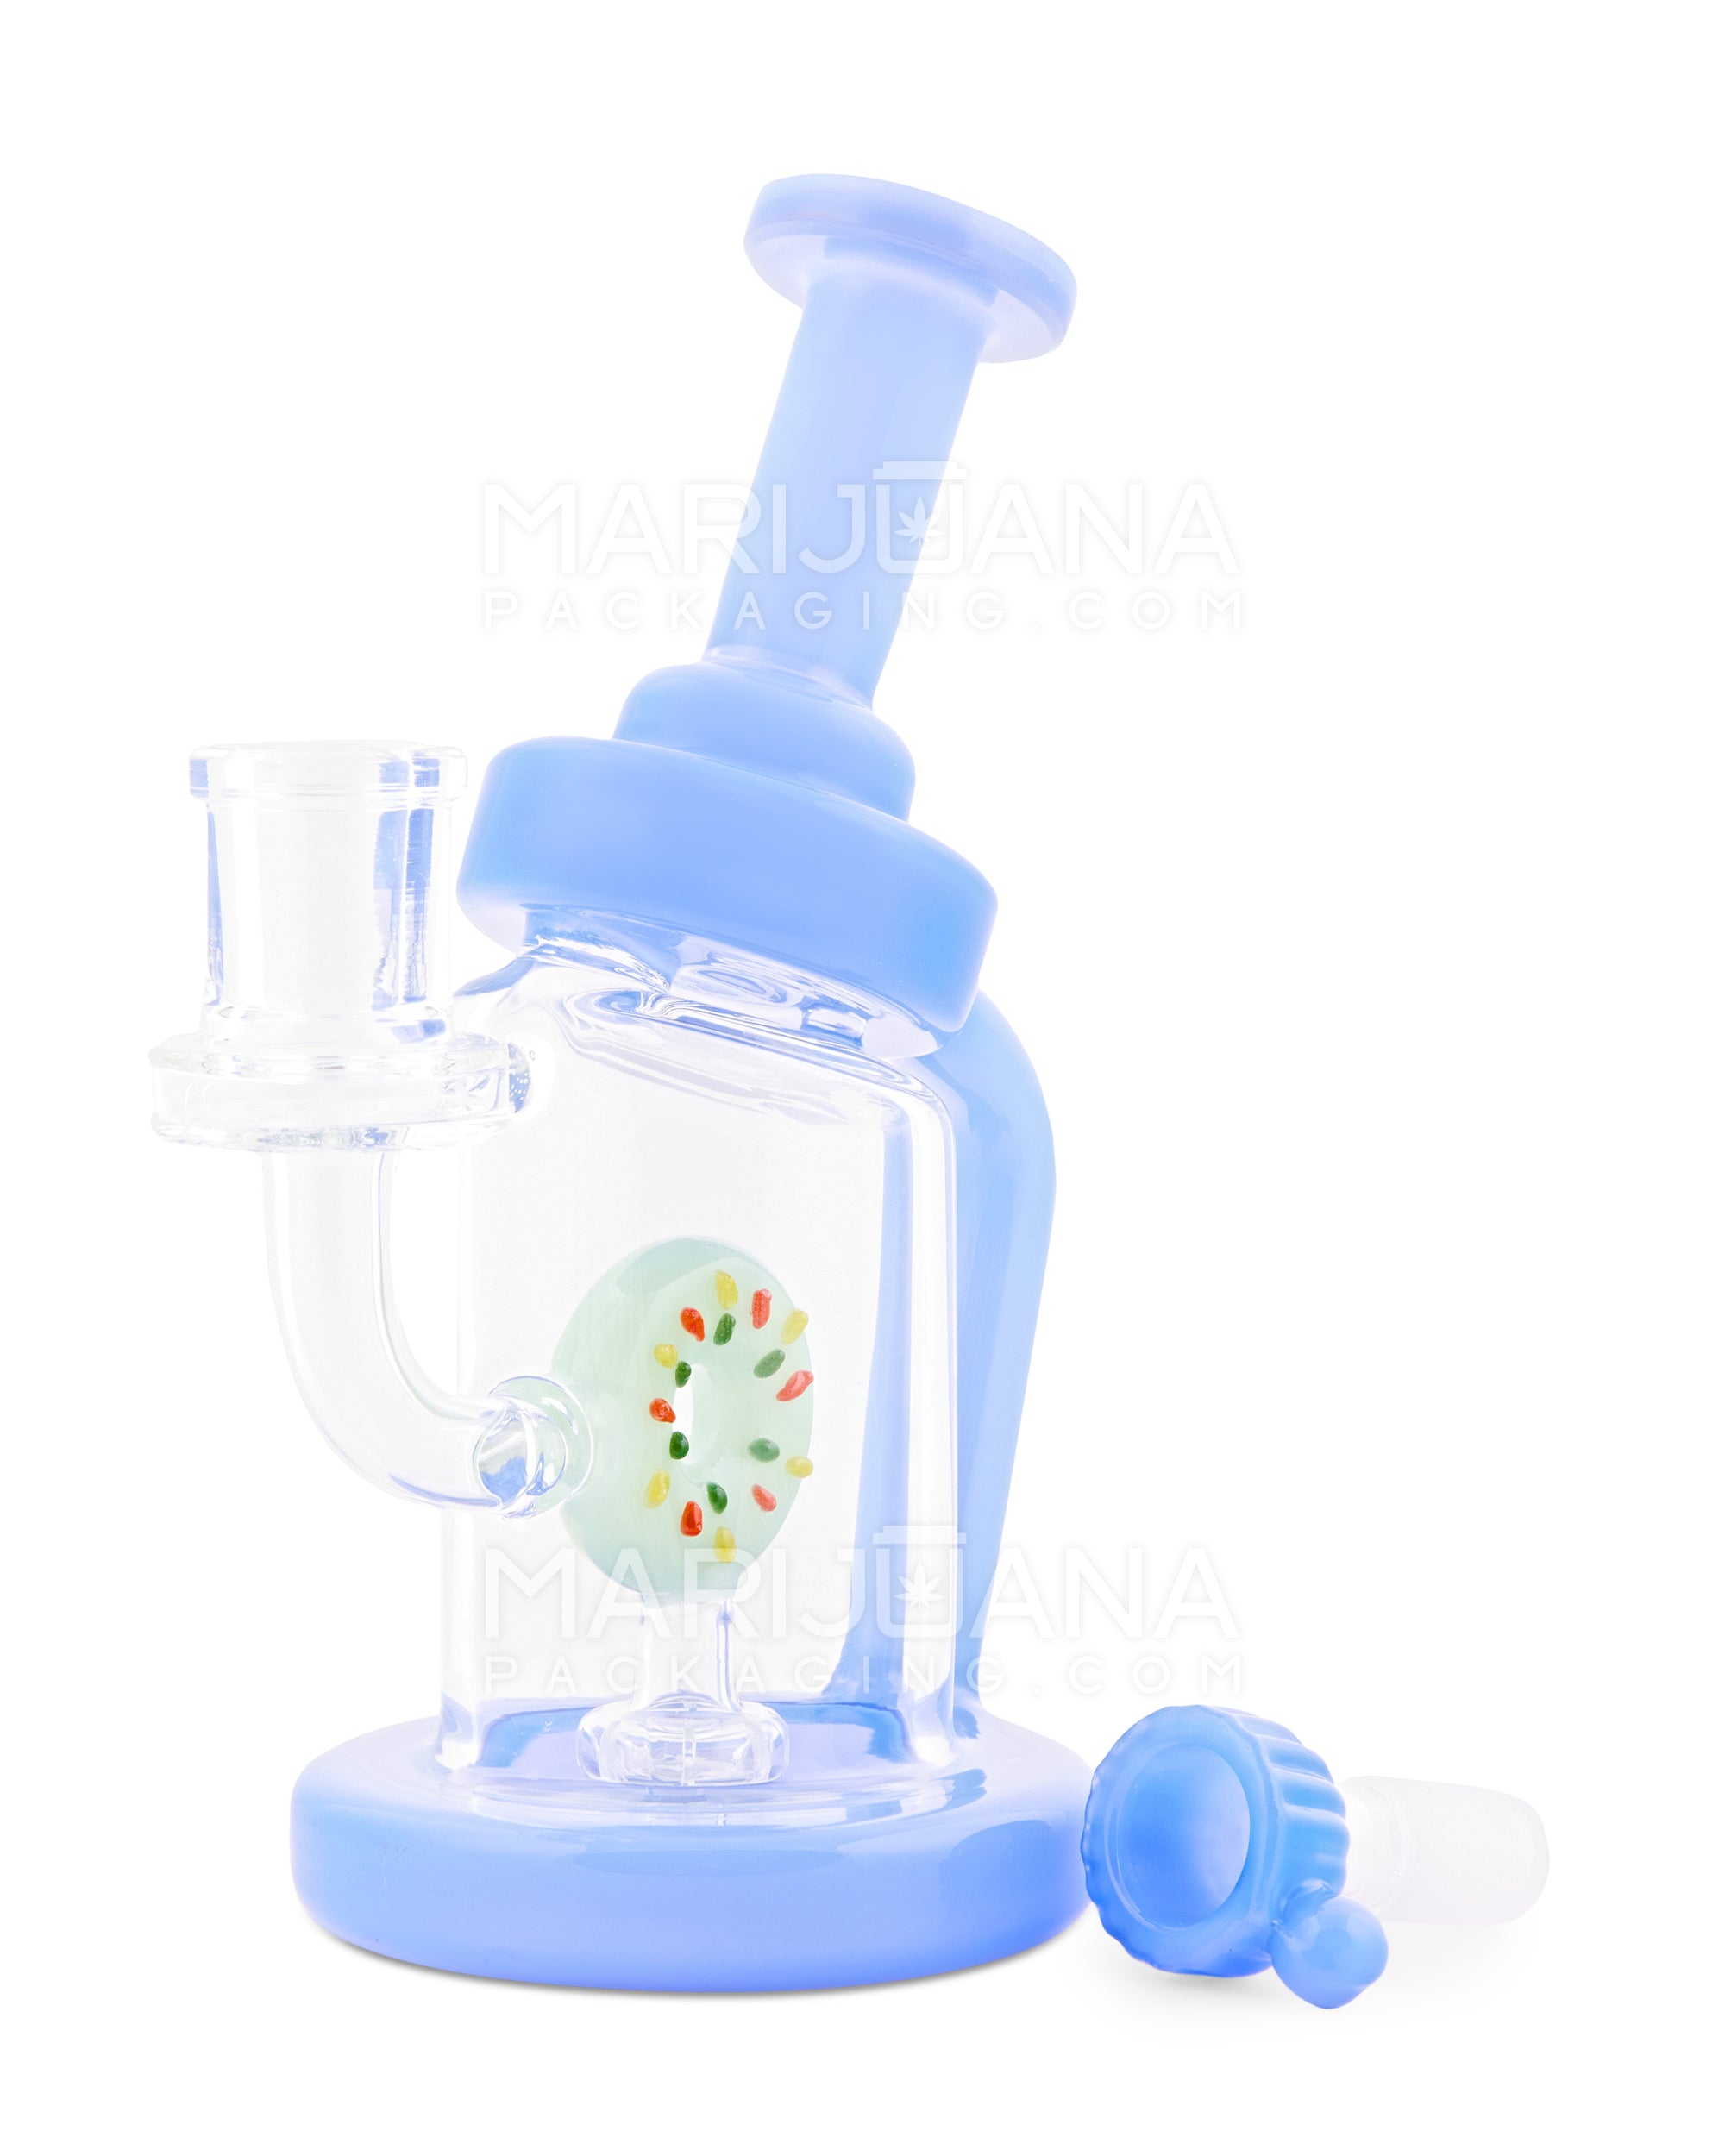 USA Glass | Bent Neck Laidback Recycler Water Pipe w/ Donut Showerhead Percolator | 7in Tall - 14mm Bowl - Blue